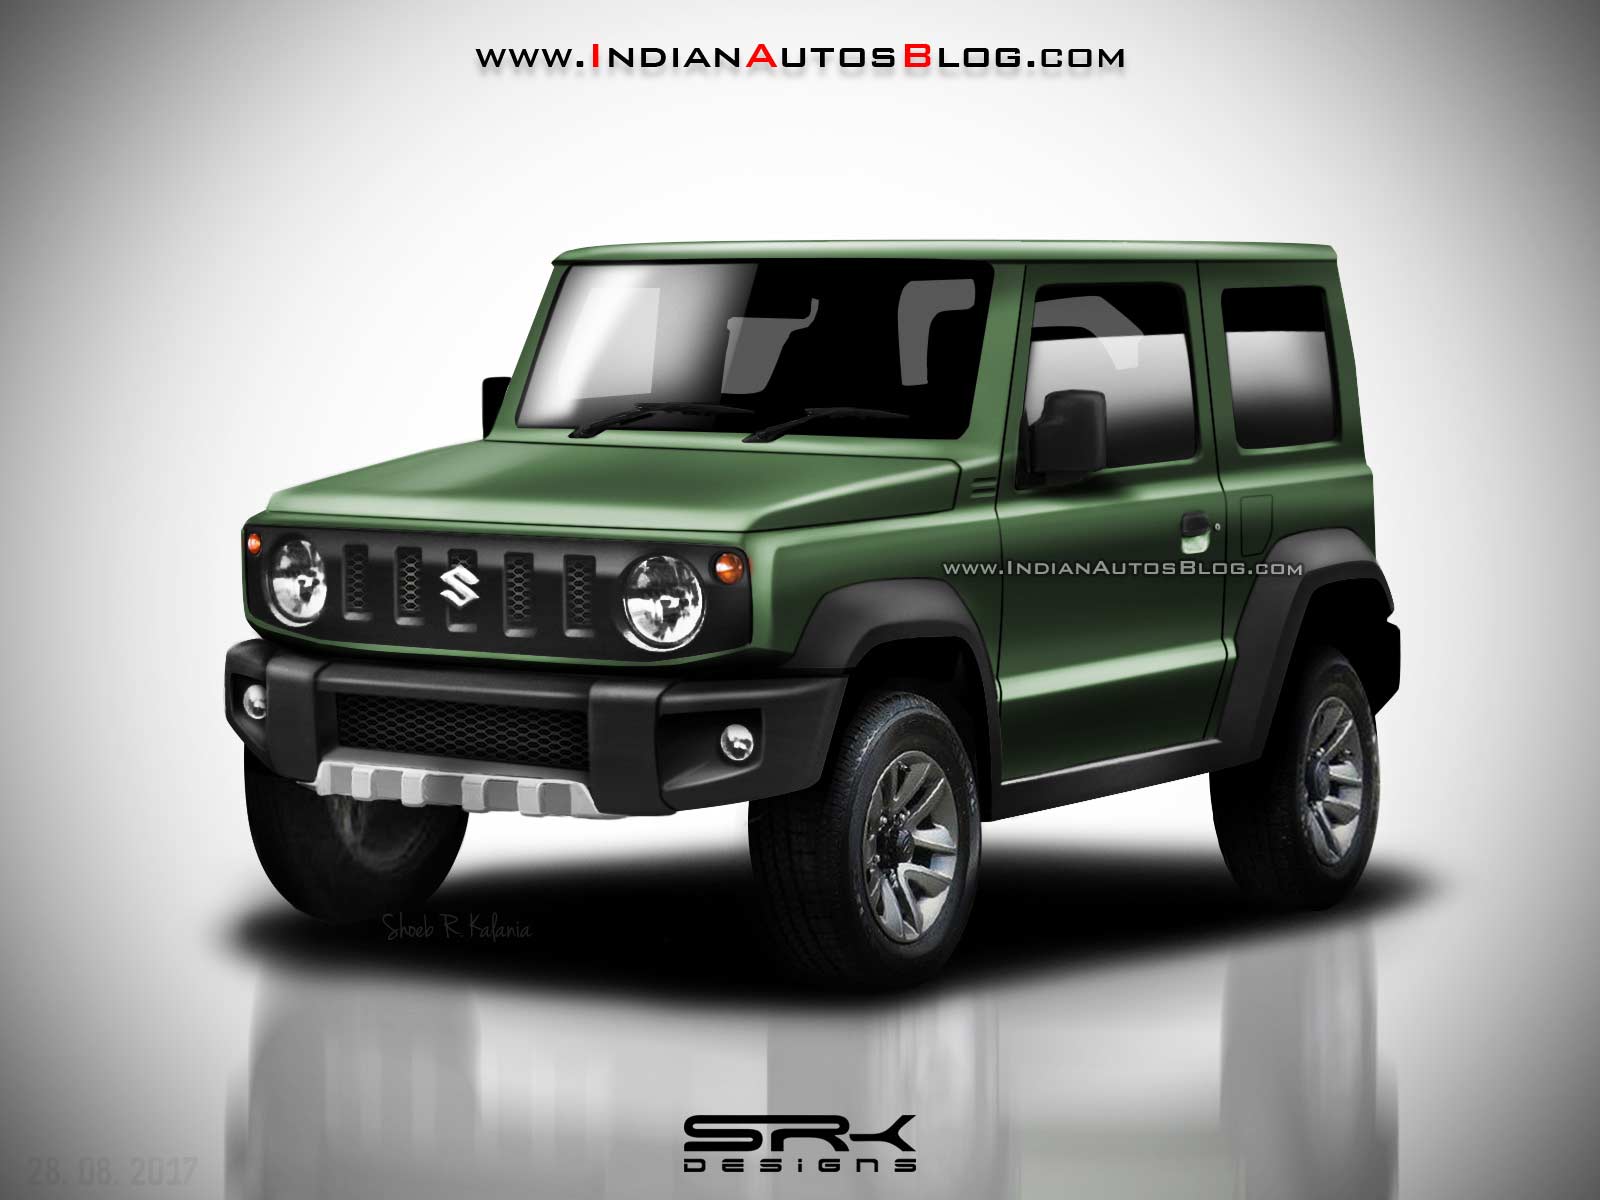 Here's A Better Look At The New Suzuki Jimny